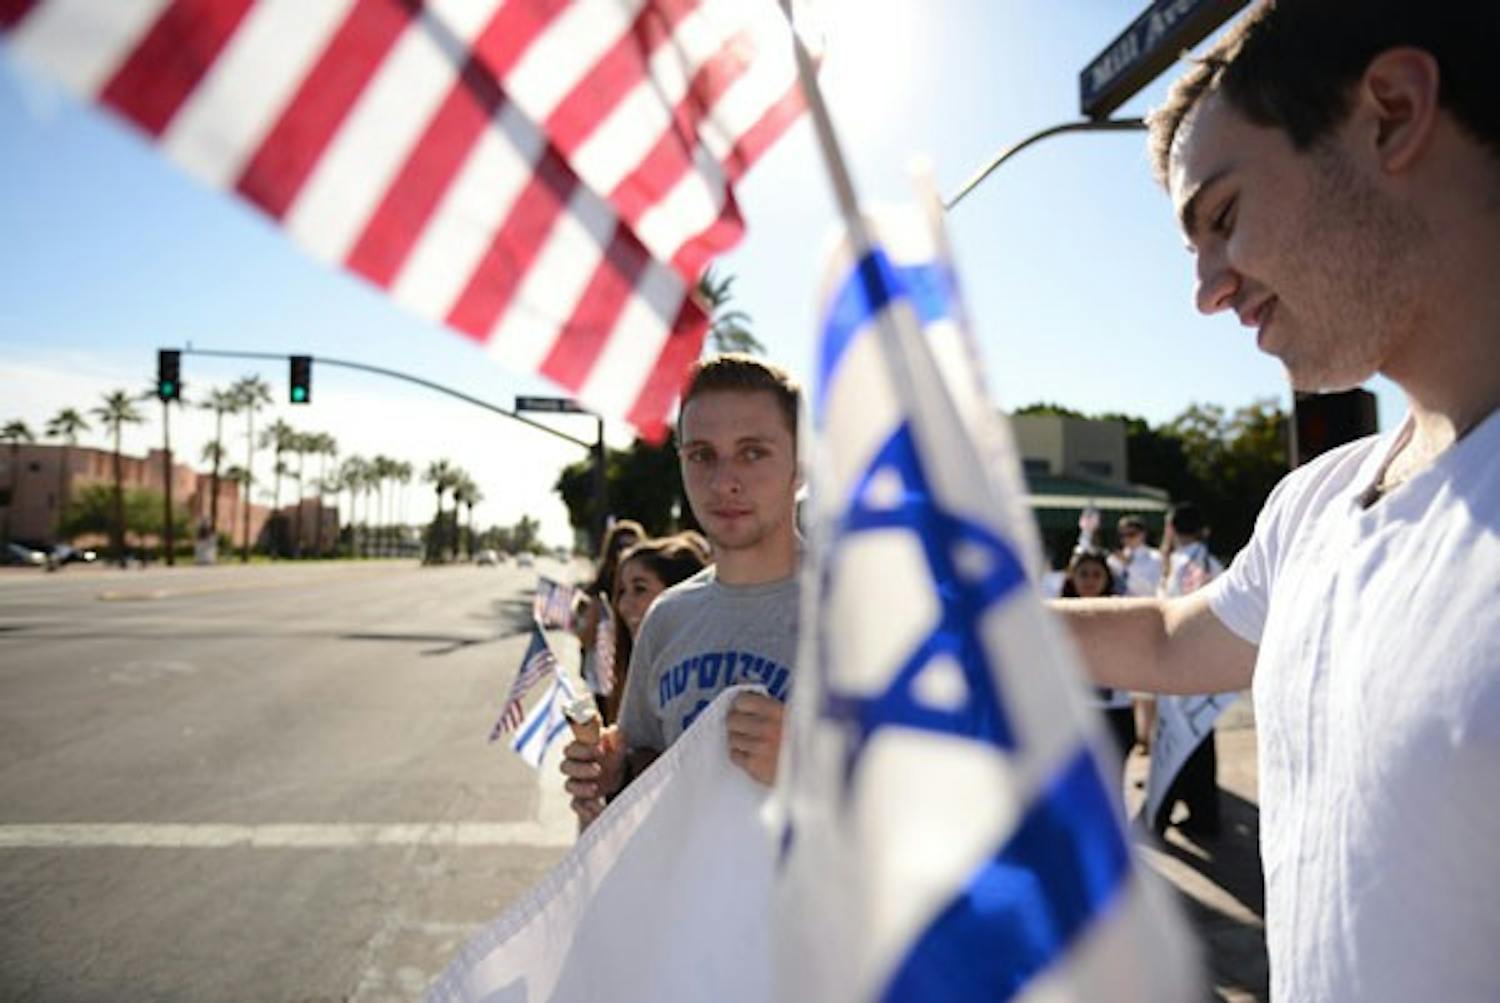 Finance and economics sophomore Jared Hirschl (left) and finance and supply chain management sophomore Sam Levine wait at the stop light at Mill and Tenth Street after departing the Student Hillel Center for the "Stand for Israel" march on Wednesday afternoon. (Photo by Aaron Lavinsky)